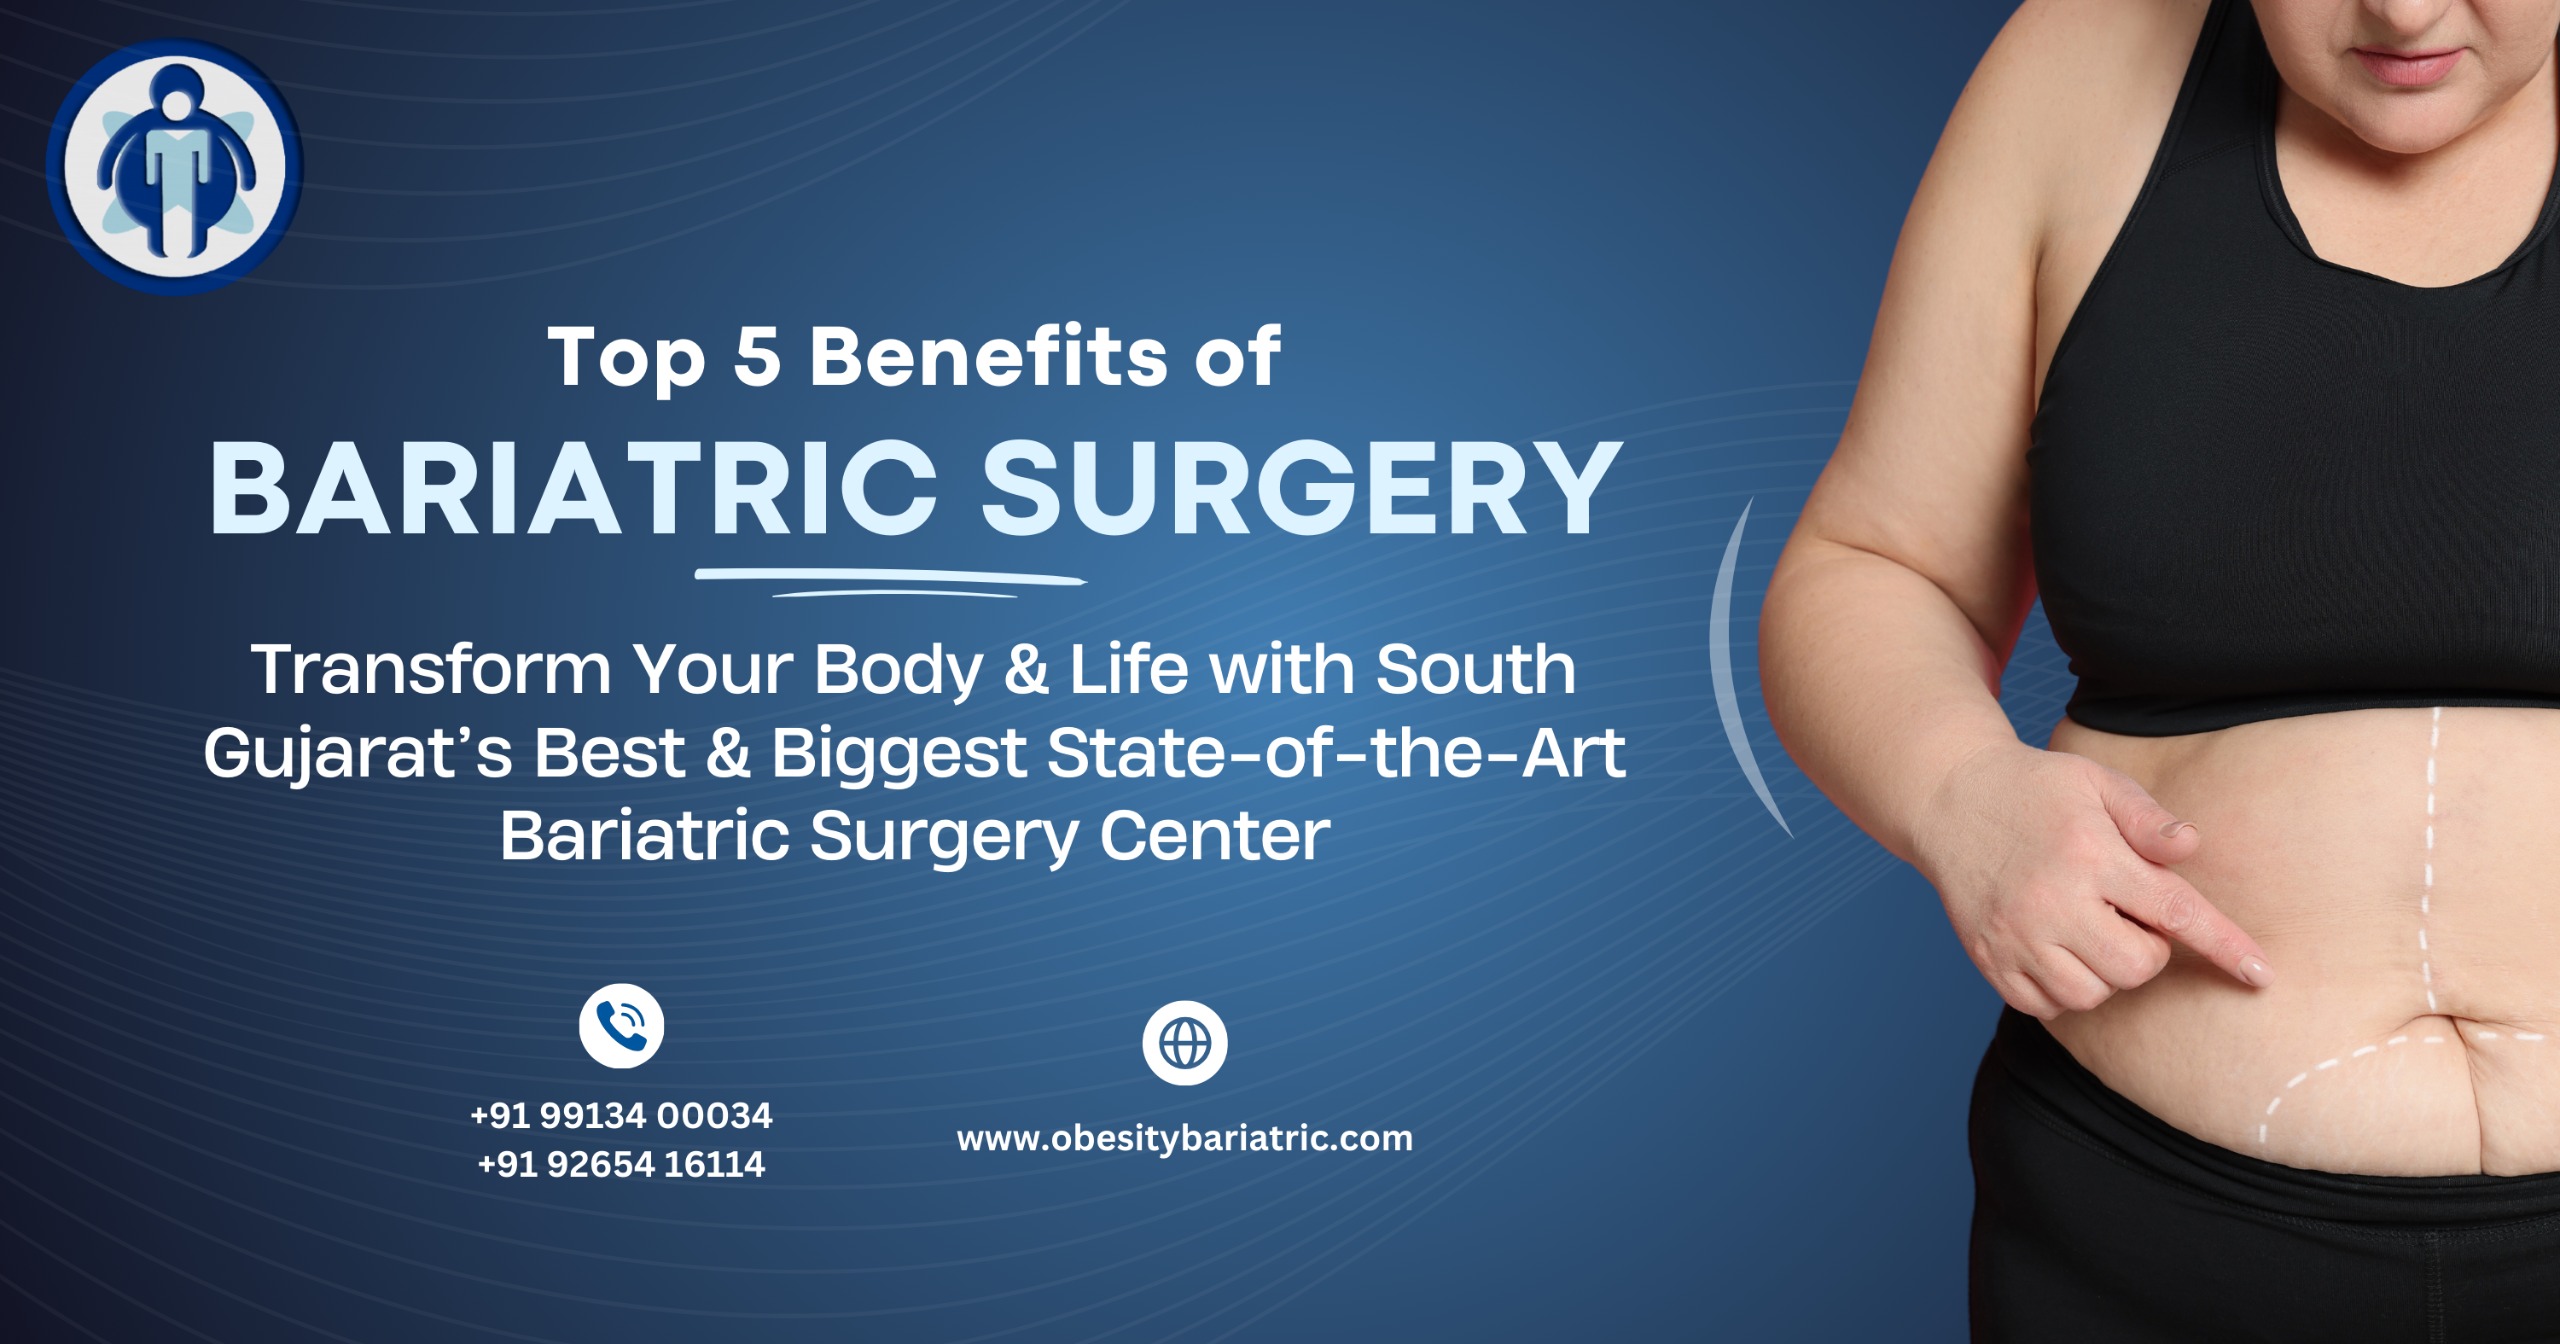 Top 5 Benefits of Bariatric Surgery: Transform Your Body & Life with South Gujarat’s Best & Biggest State-of-the-Art Bariatric Surgery Center